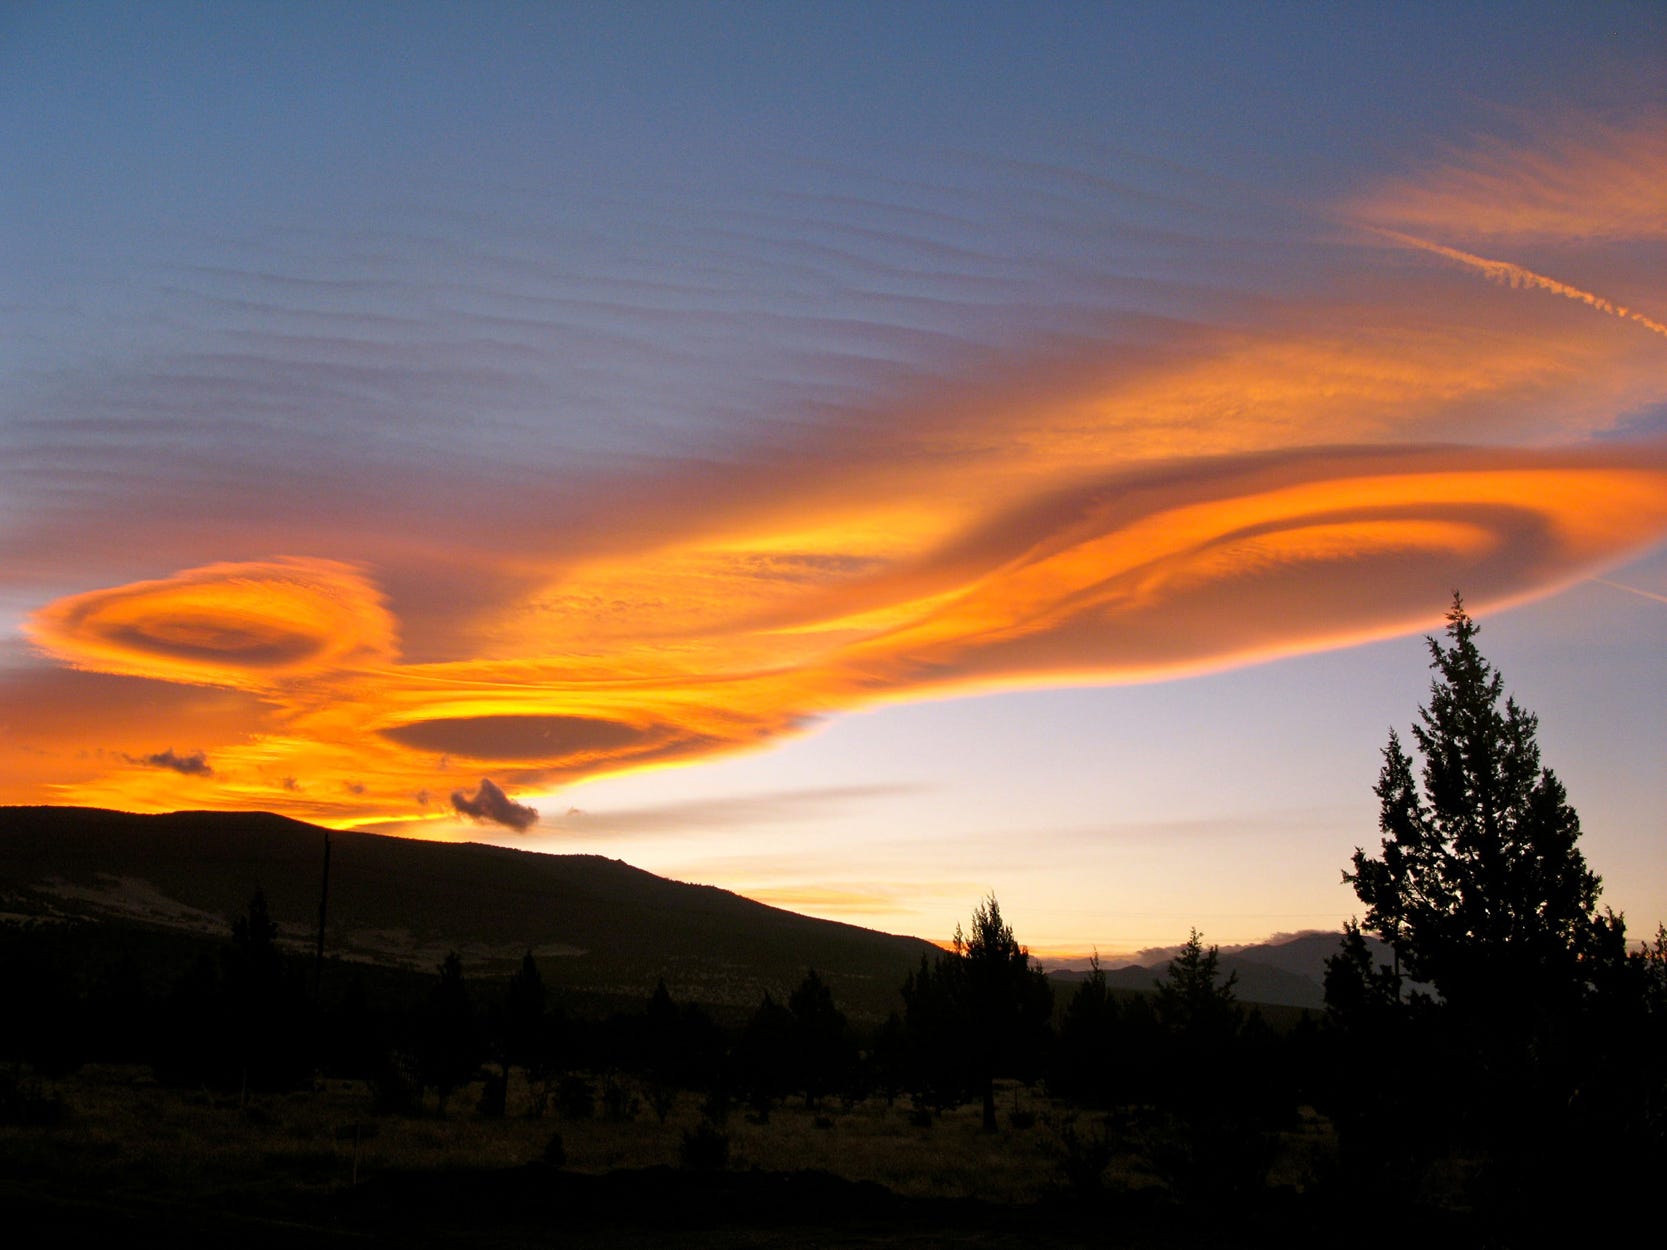 A series of lenticular clouds can be seen in this photo taken in the Mt. Shasta Area and submitted by Sulena Sivananda.